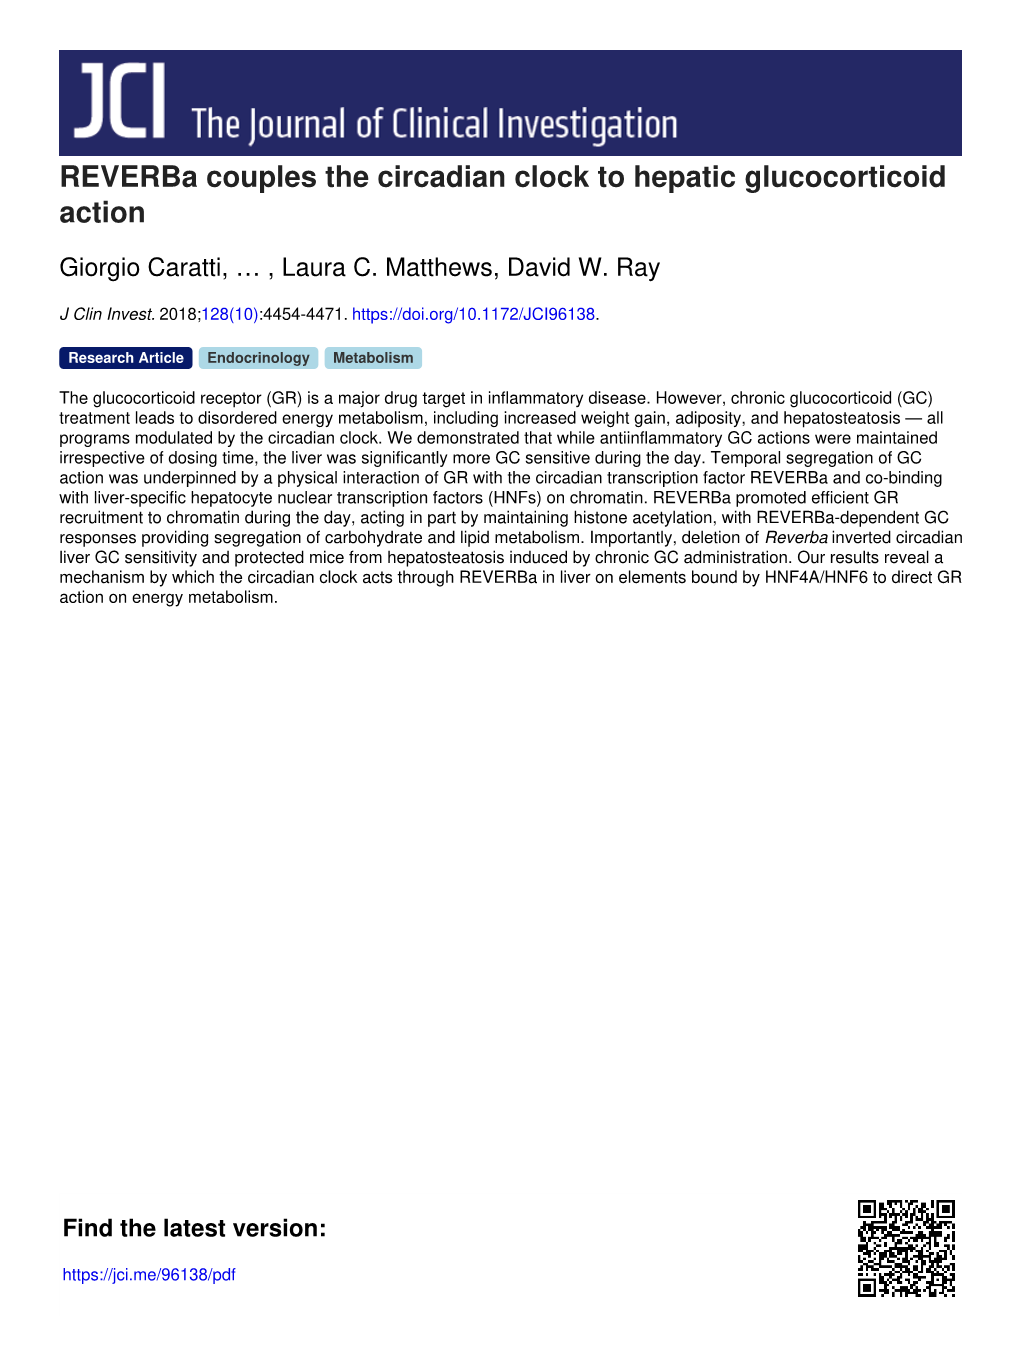 Reverba Couples the Circadian Clock to Hepatic Glucocorticoid Action